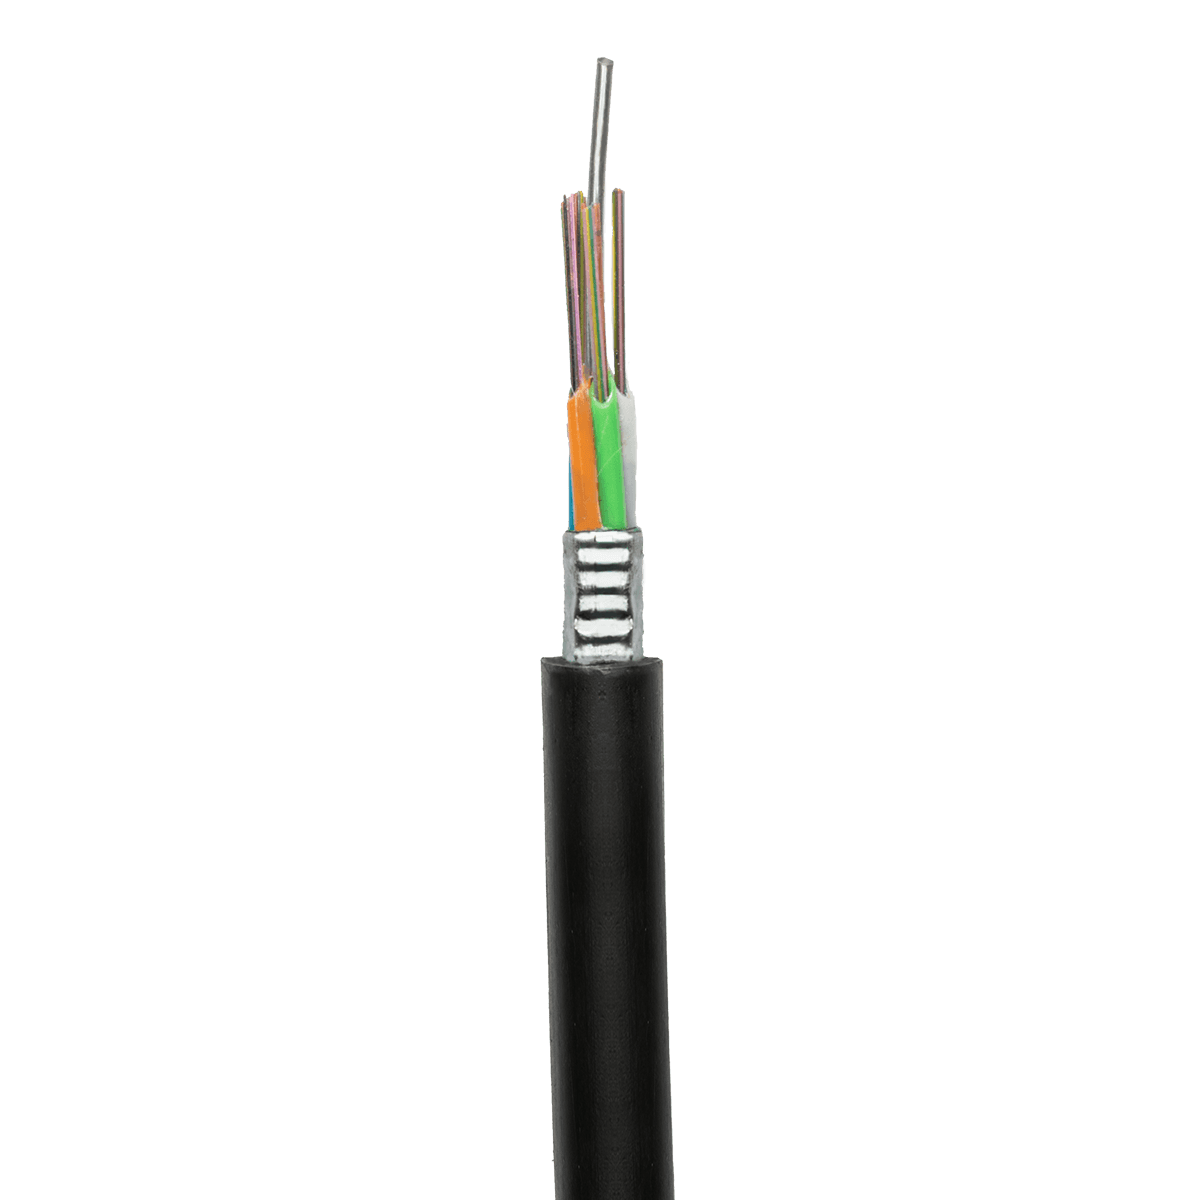 Stranded Loose Tube Light-armored Cable